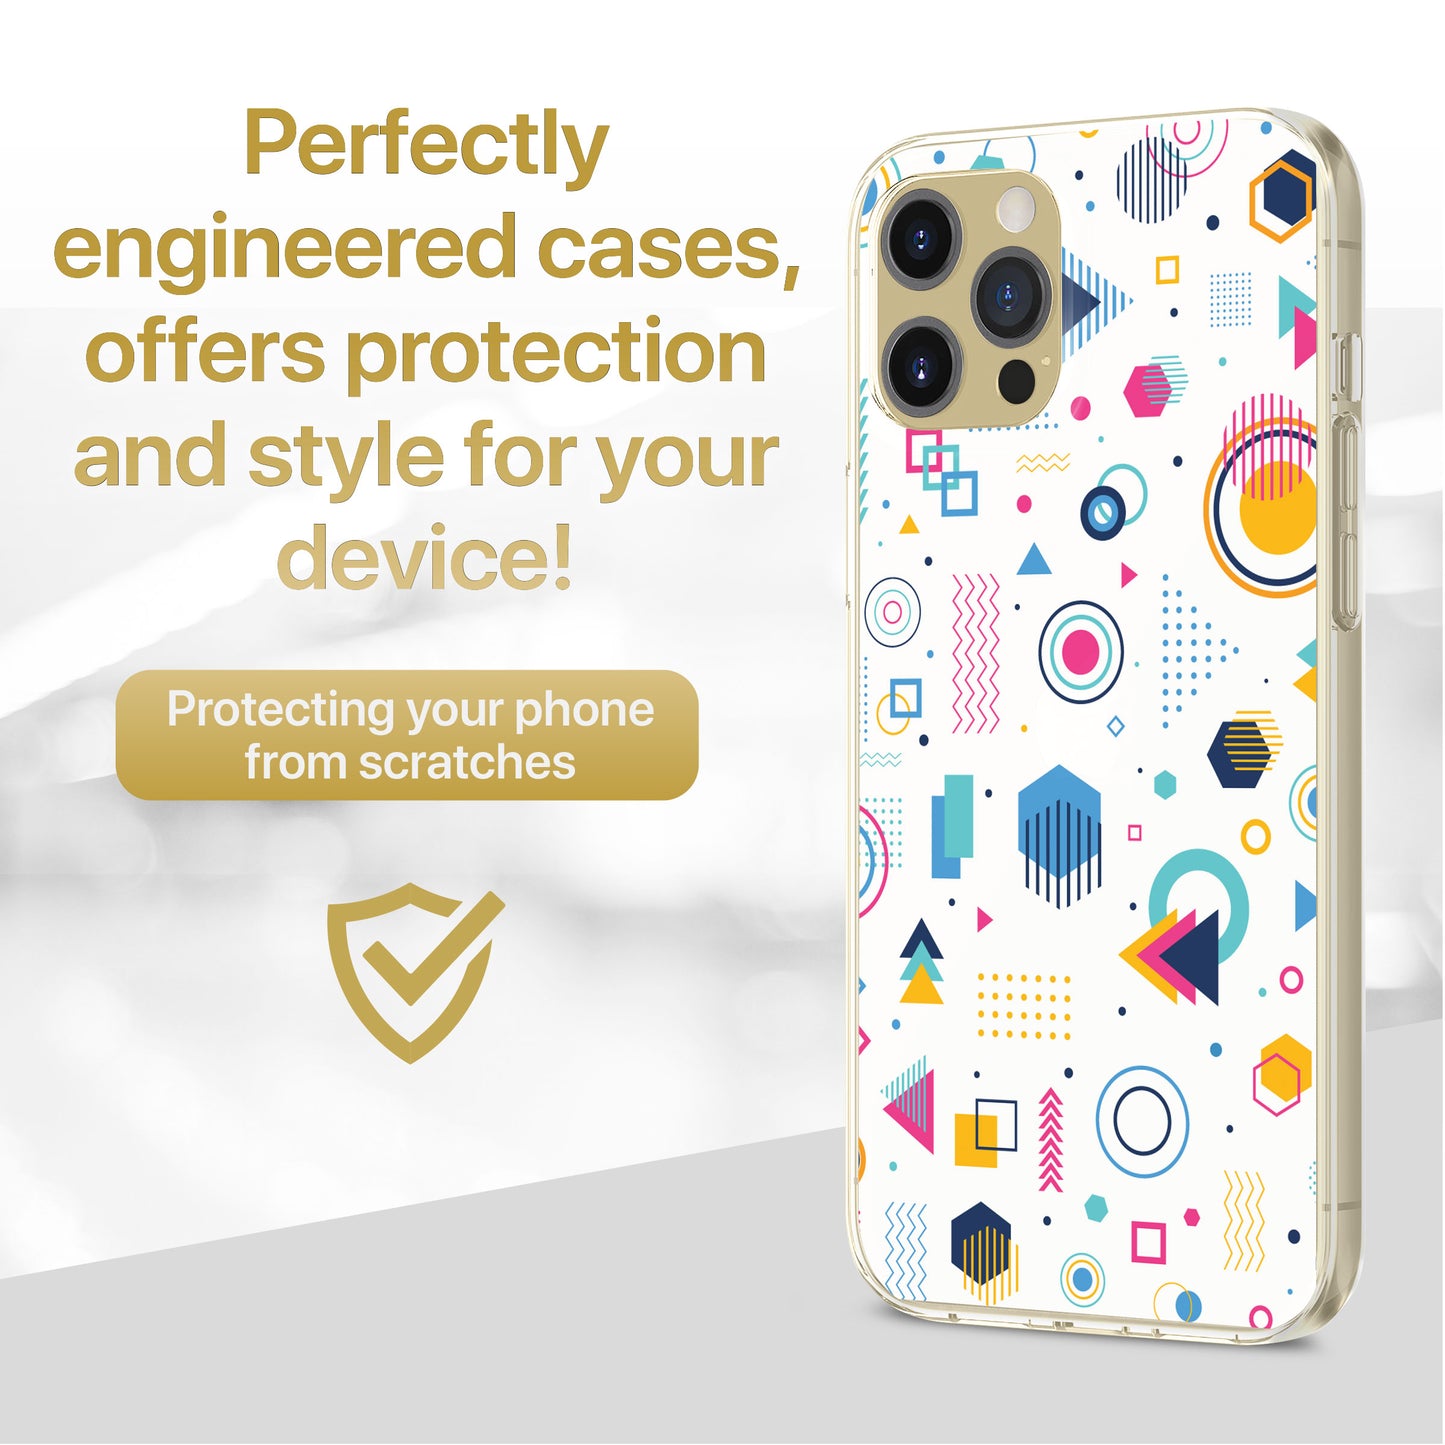 TPU Case Clear case with (Geomac) Design for iPhone & Samsung Phones